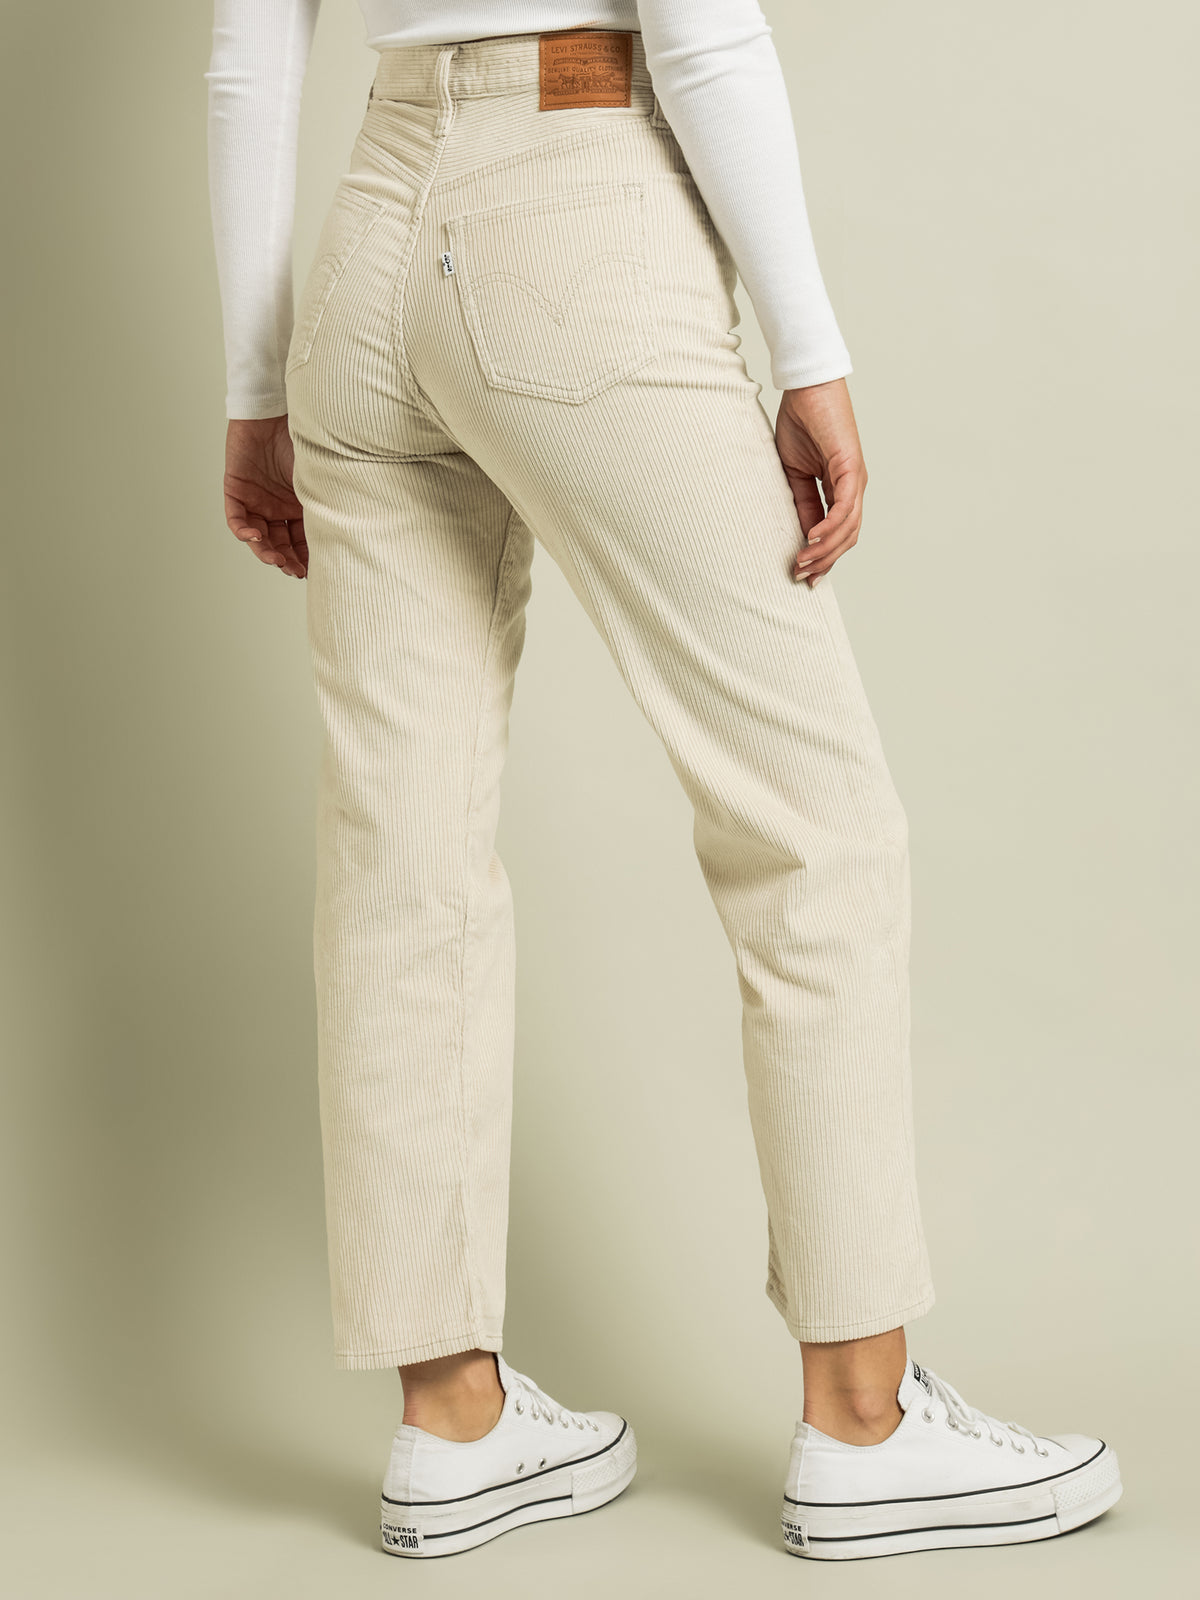 Ribcage Straight Ankle Corduroy Pants in Sandshell Wide Wale